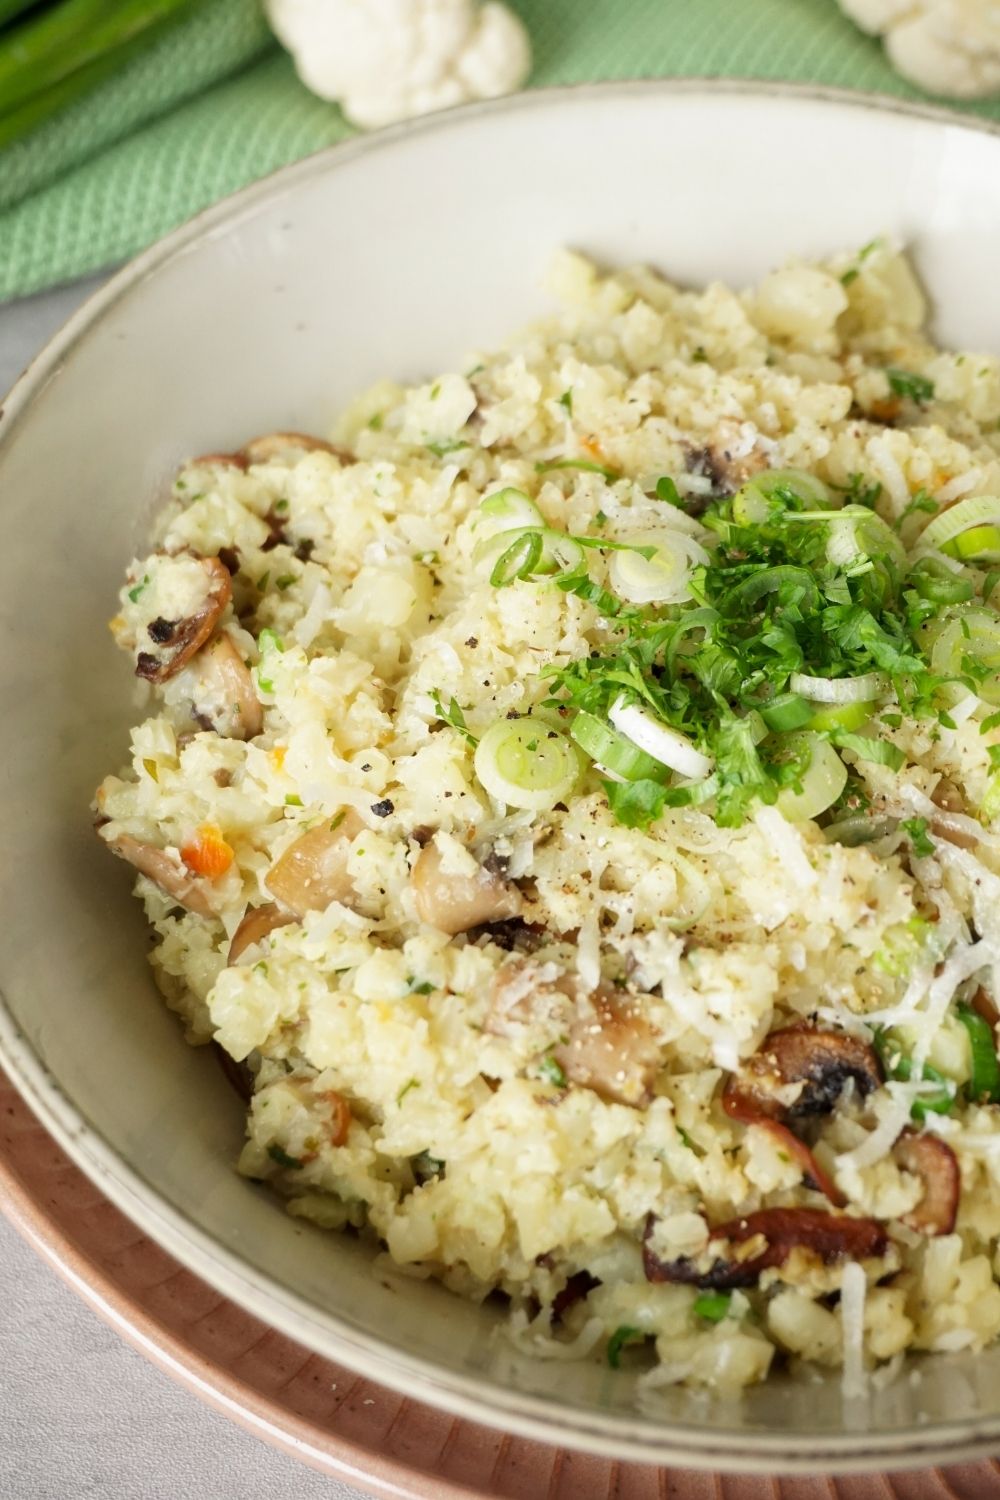 Leckeres Low Carb Risotto mit Blumenkohl